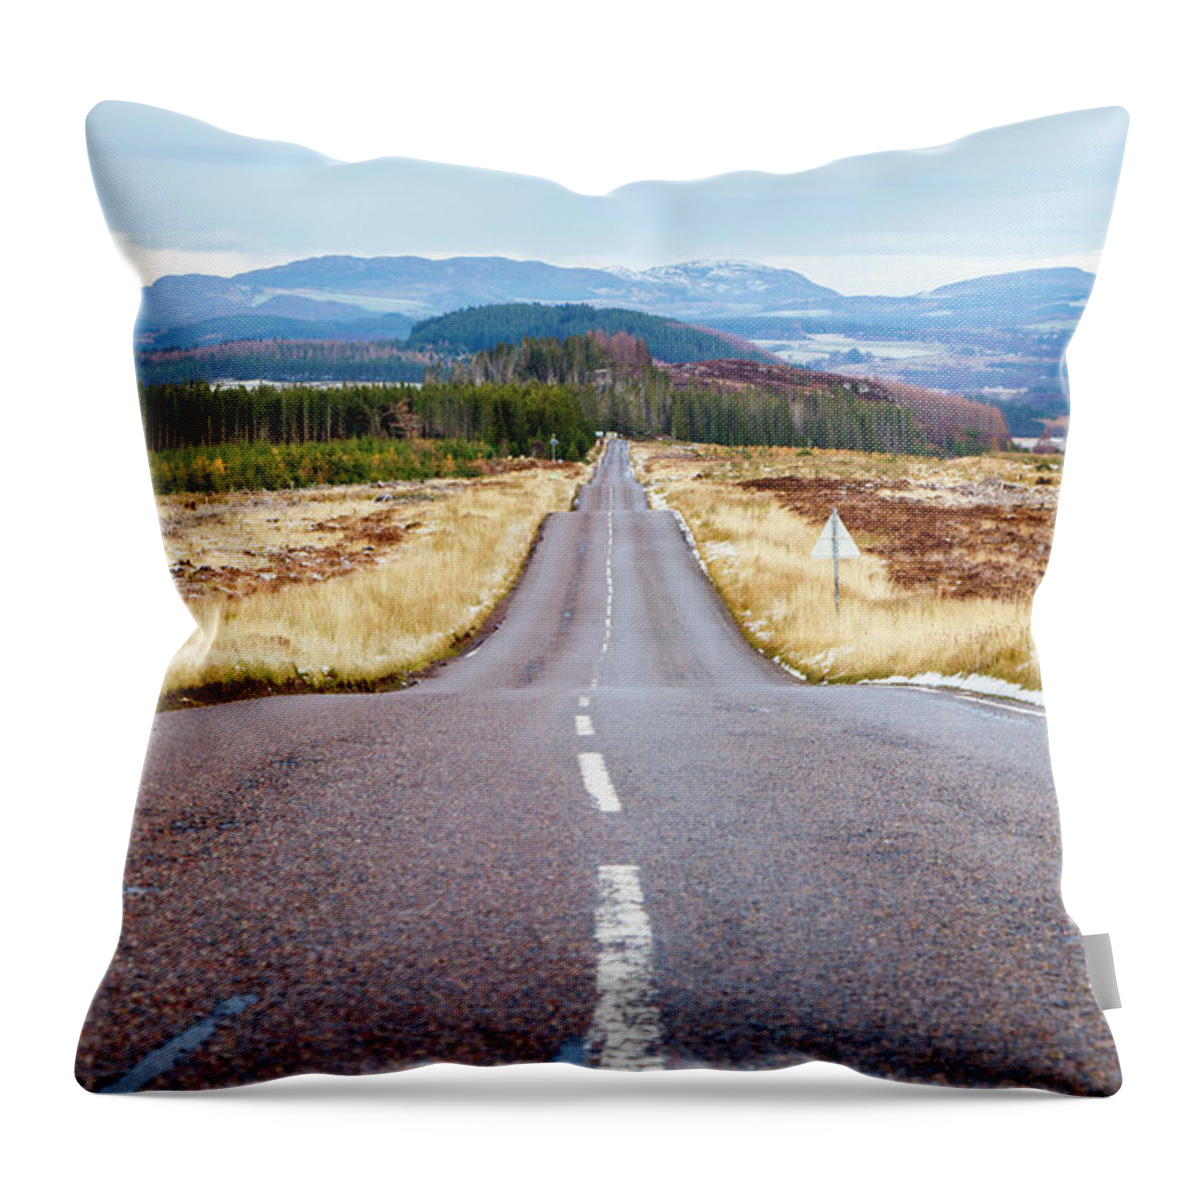 Bumpy Throw Pillow featuring the photograph A Highland Road by Rick Deacon